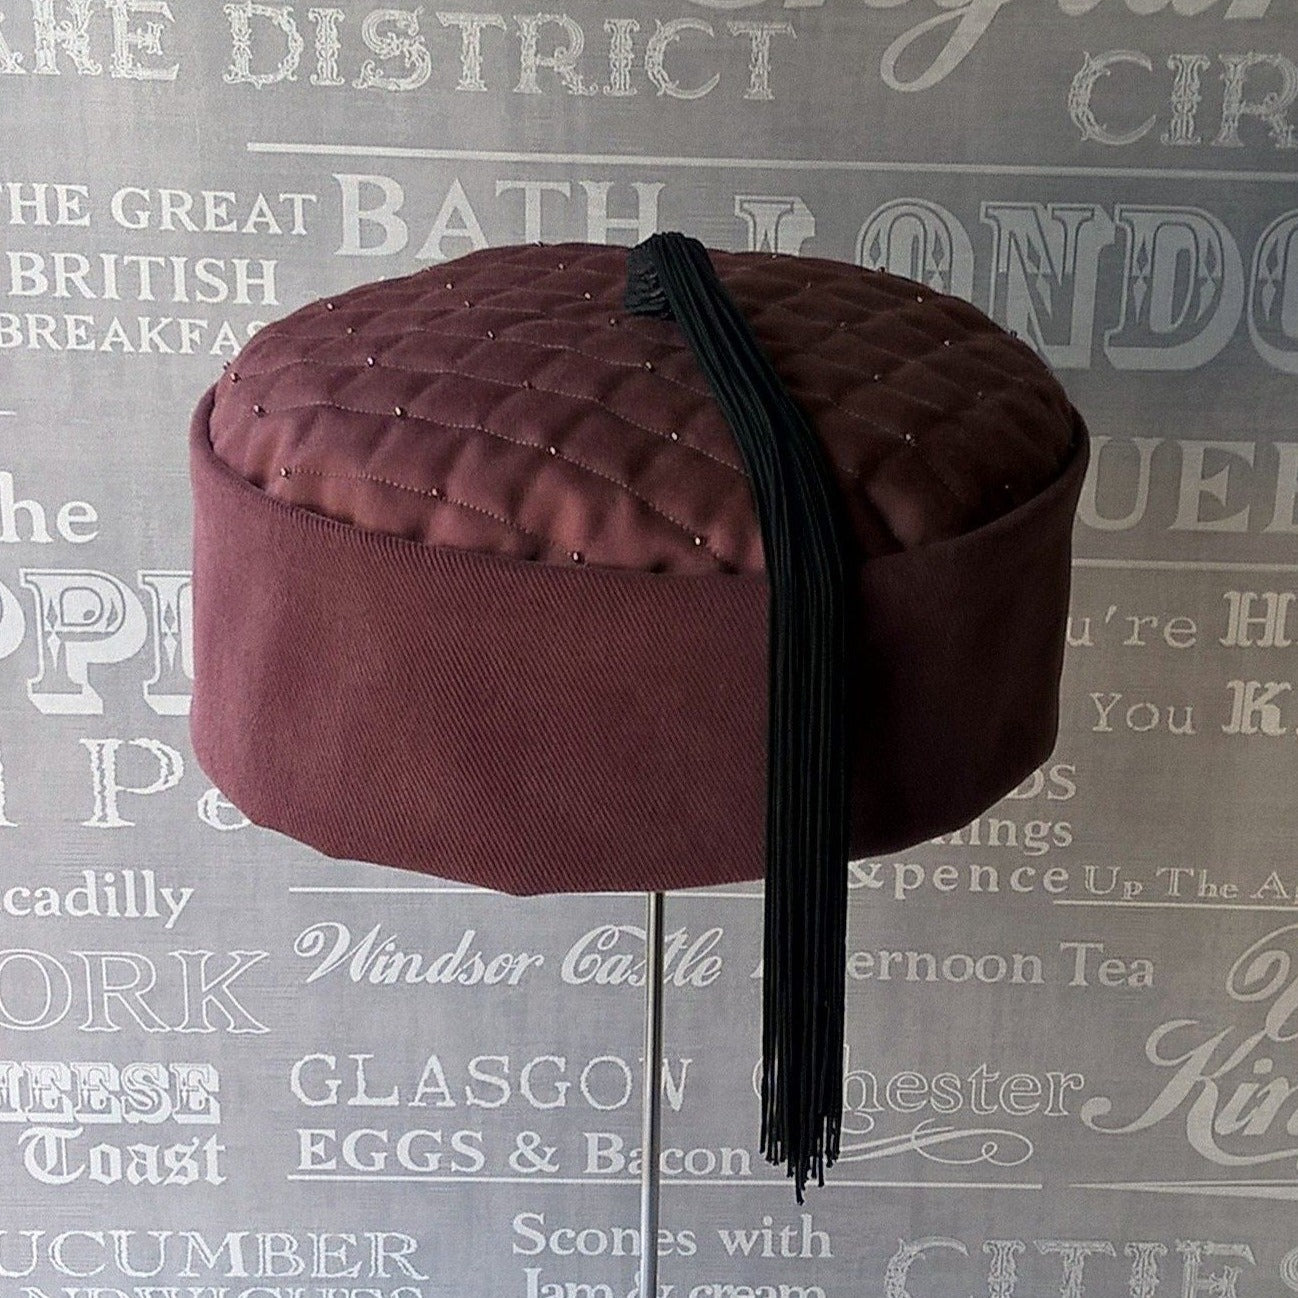 Quilted pillbox smoking cap in maroon with black tassel by TwiLd Capit Hog